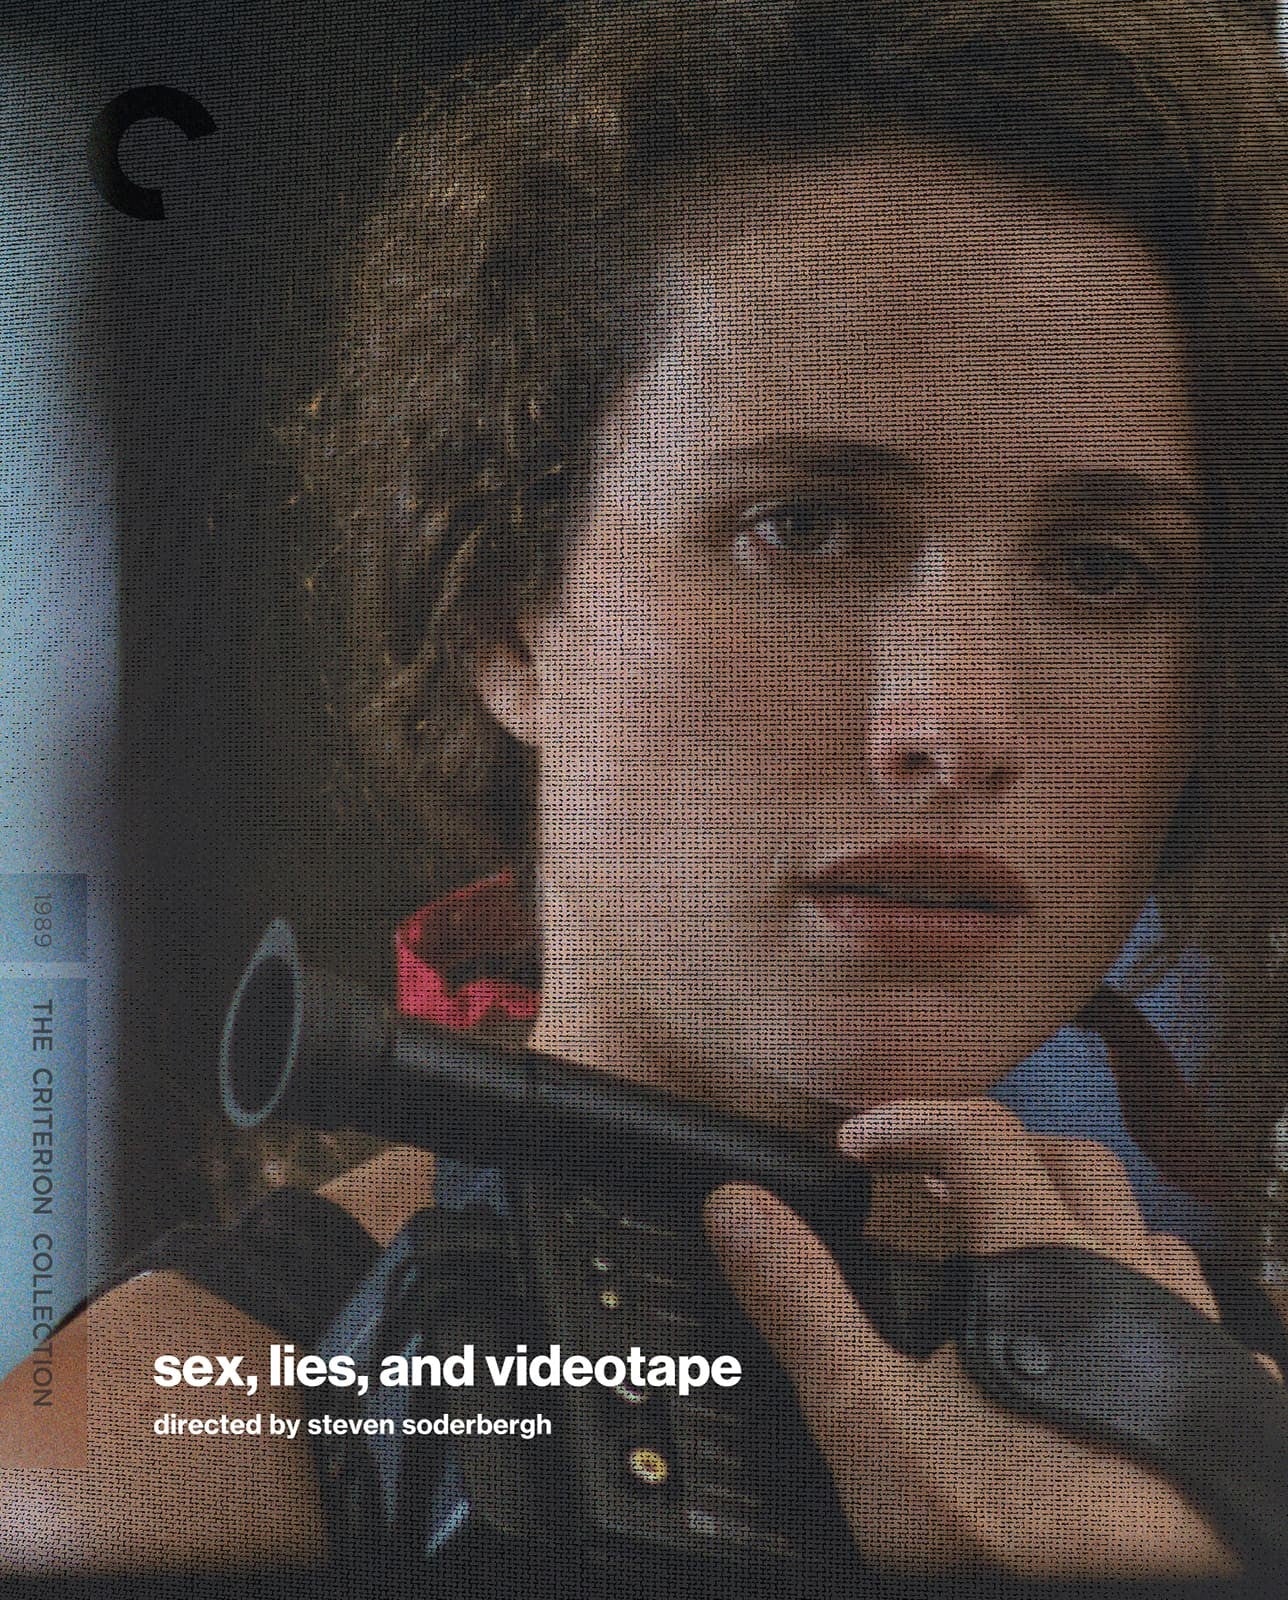 Sex, Lies and Videotape - Criterion Collection (Blu-ray)